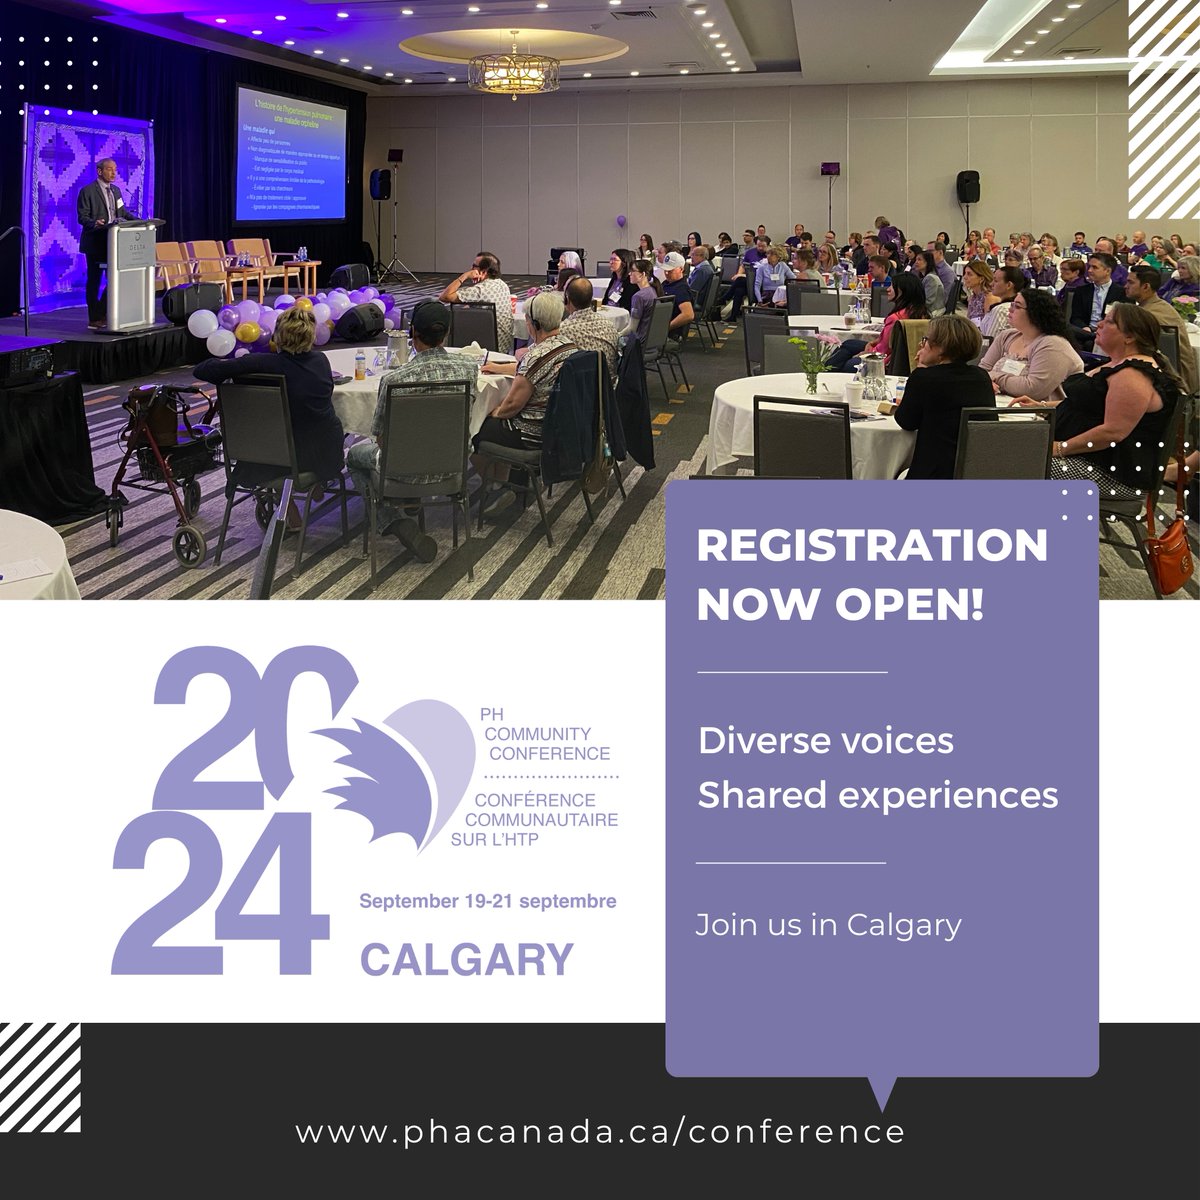 📣 Registration is now OPEN for #PHACanada 2024 #PHCommunity Conference! 🌟 Join us for an incredible gathering where we will celebrate the diverse voices and shared experiences of our community! Secure your spot today: ow.ly/kFSN50R5Ux6 #PHConference #Calgary #Alberta